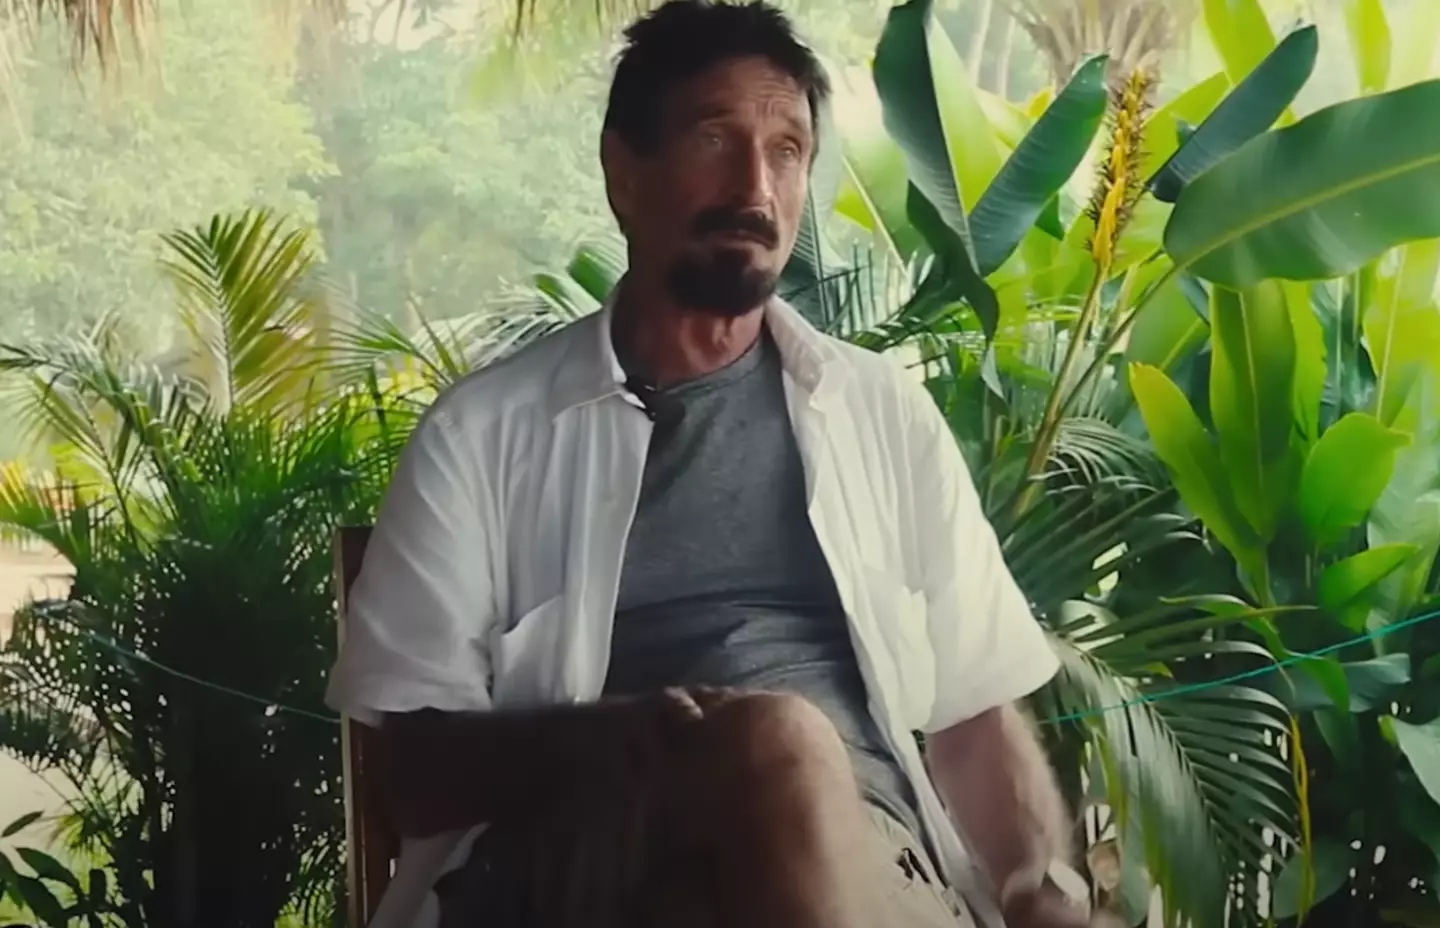 The documentary explores McAfee's childhood and life on the run.